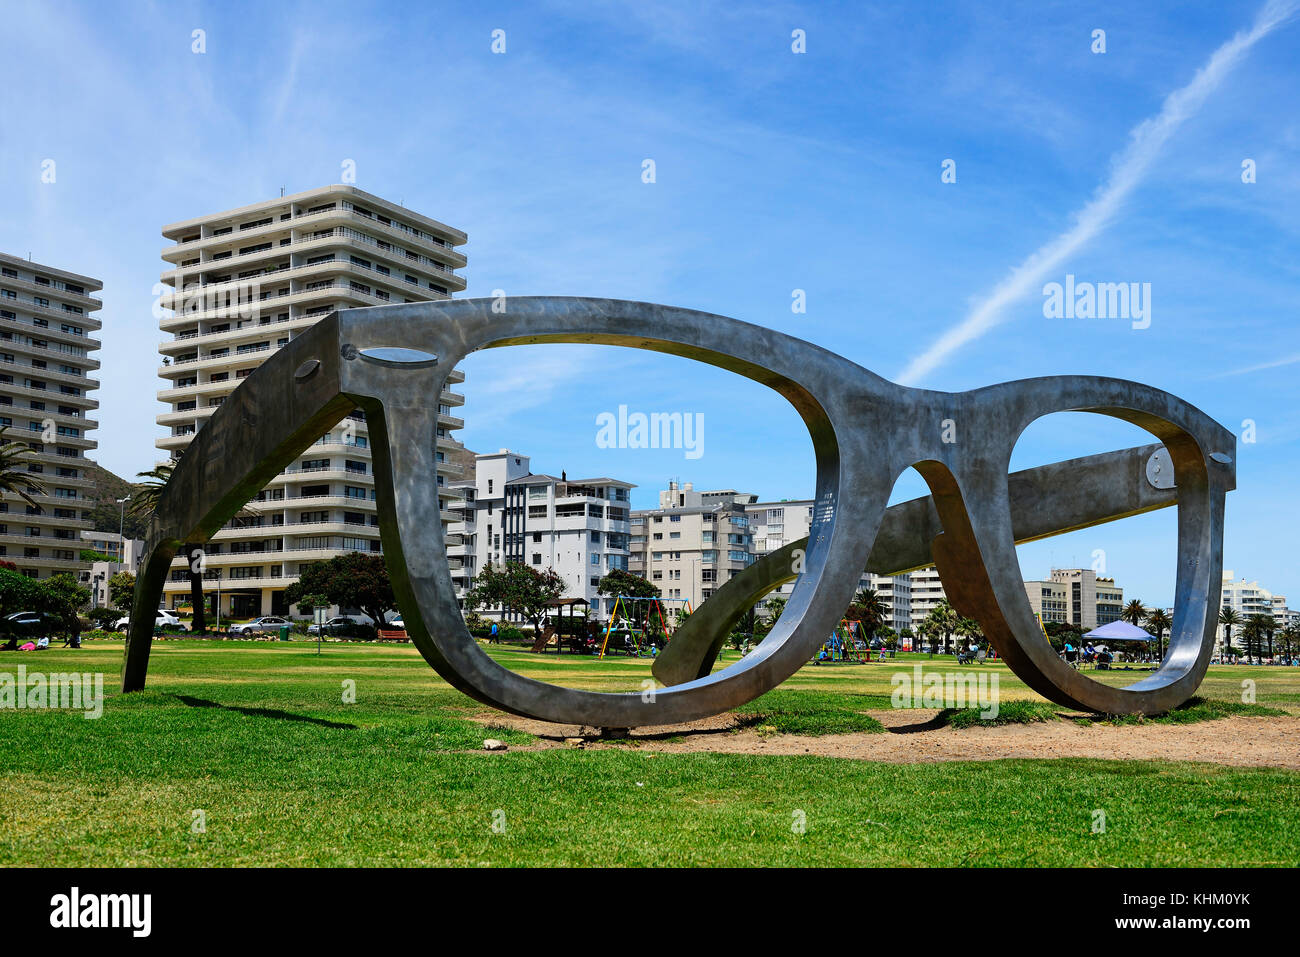 Sculpture Ray Ban glasses, artist Michael Elion, Sea Point, Cape Town, West Cape, South Africa Stock Photo